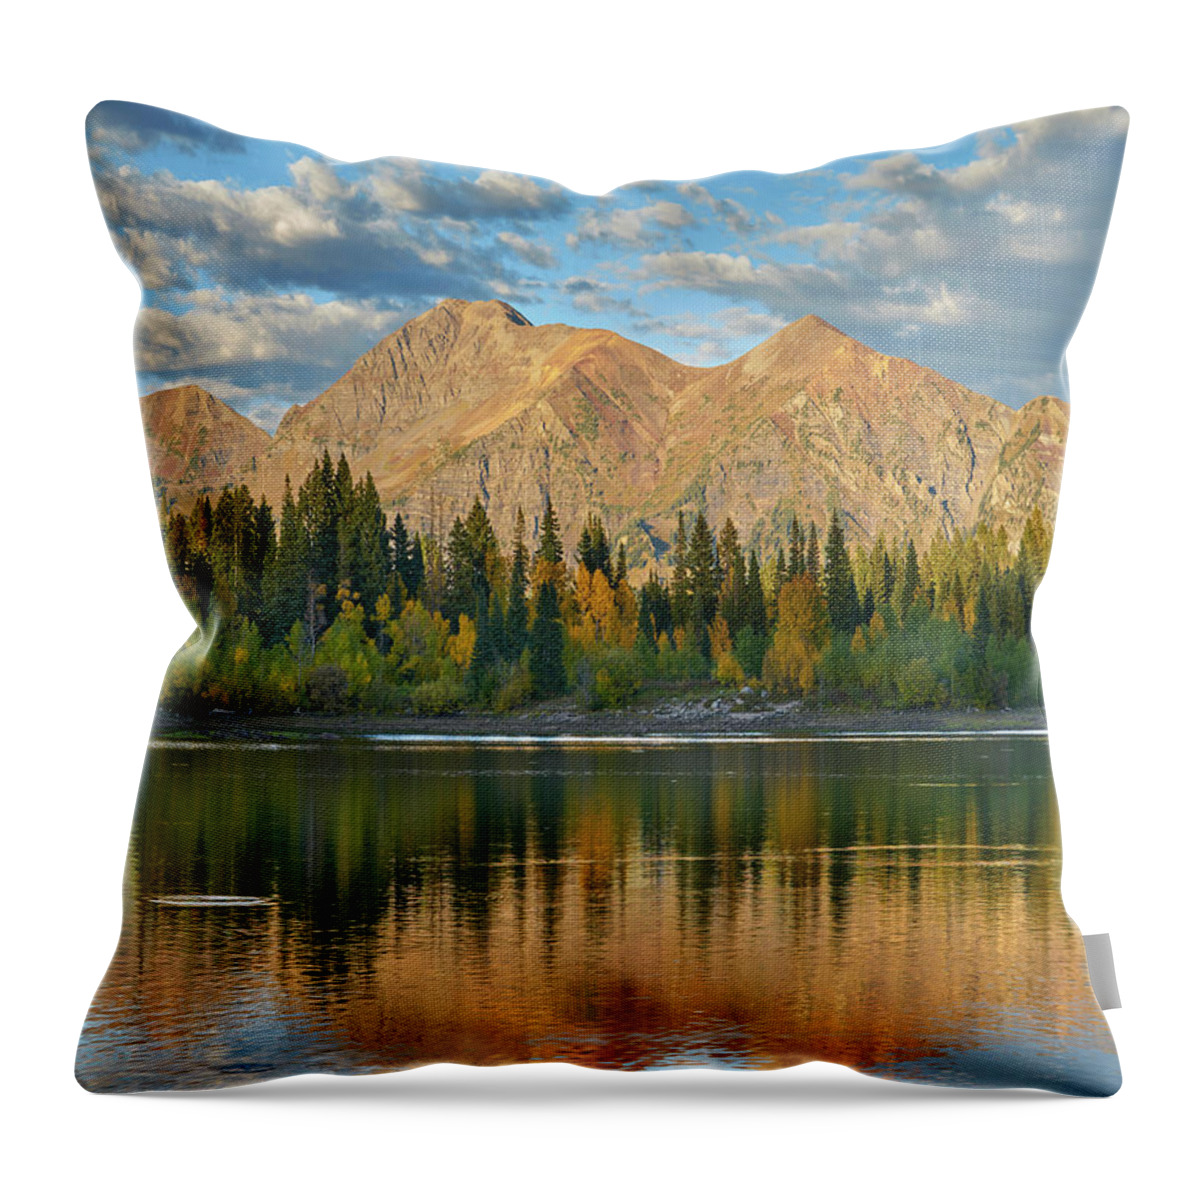 00567576 Throw Pillow featuring the photograph Ruby Range, Lost Lake Slough, Colorado #4 by Tim Fitzharris